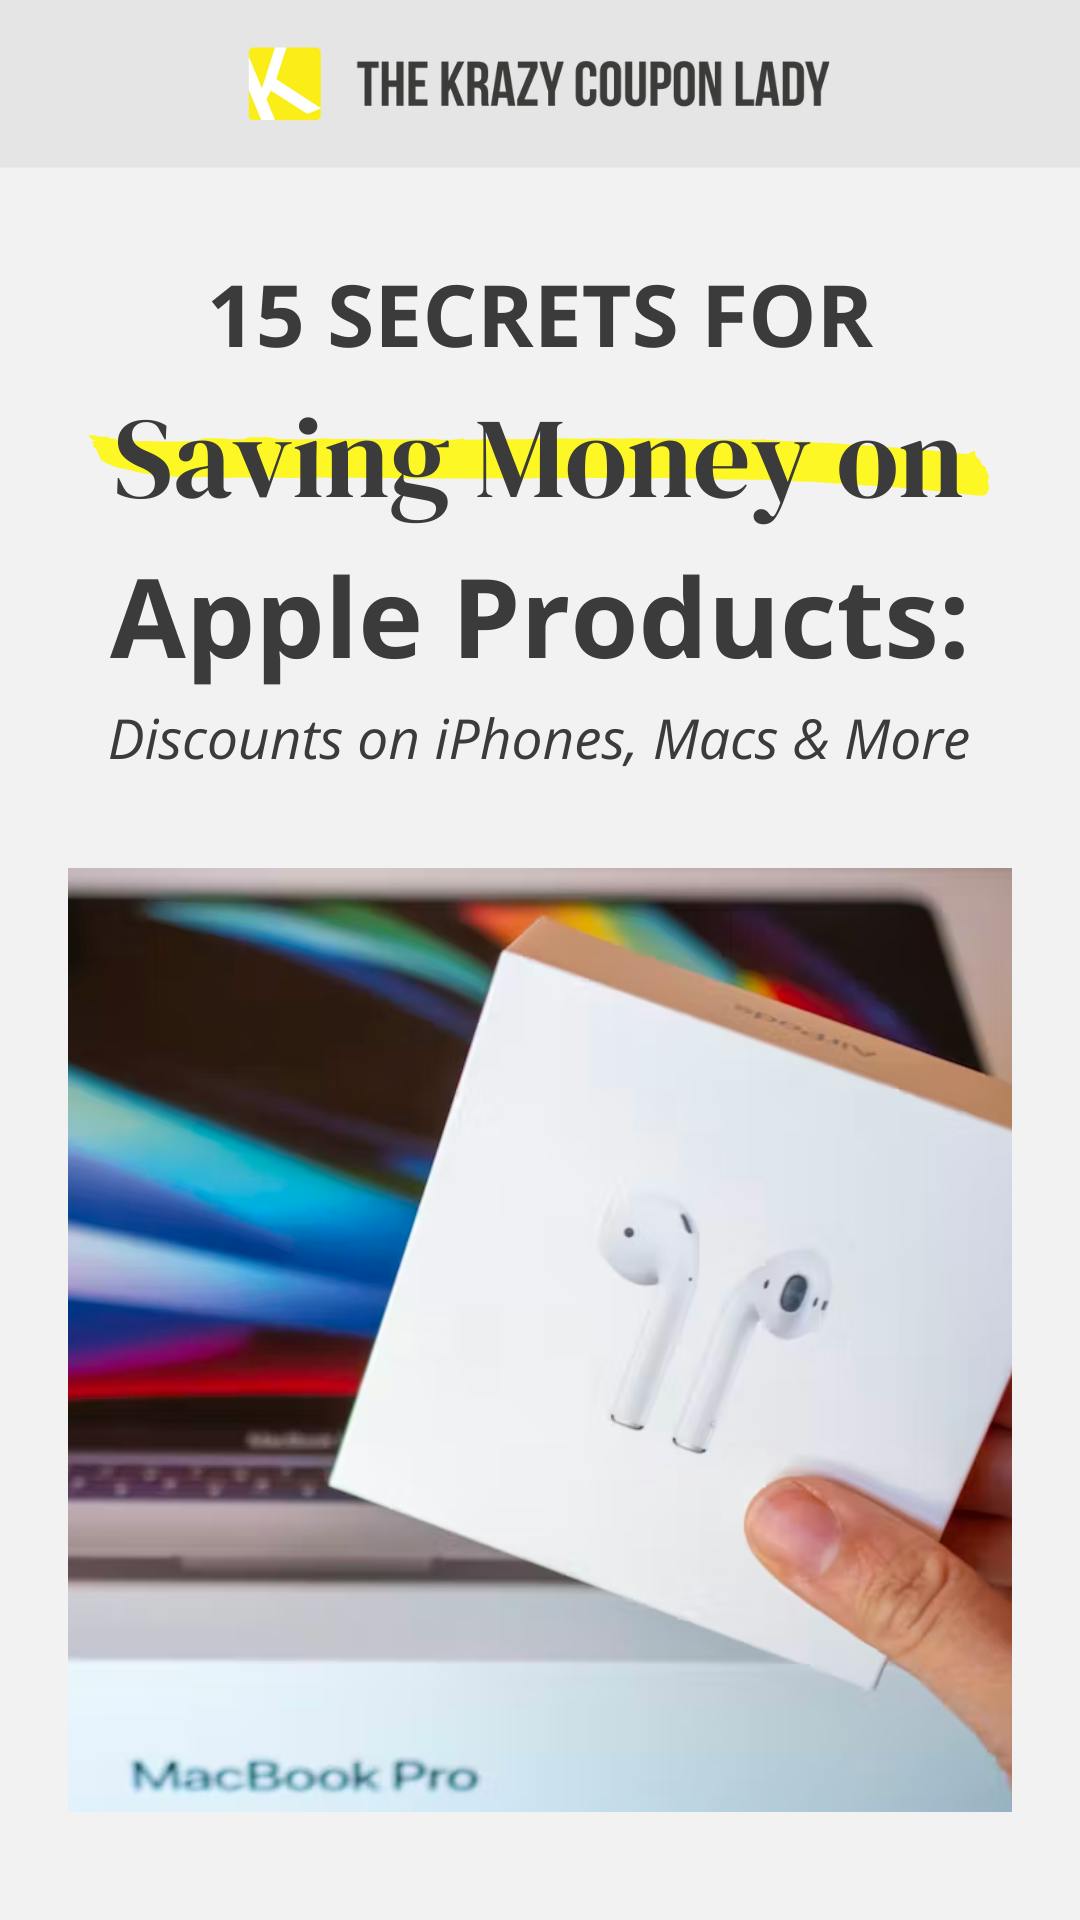 15 Secrets To Finding Apple Discounts on iPhones, Macs & More